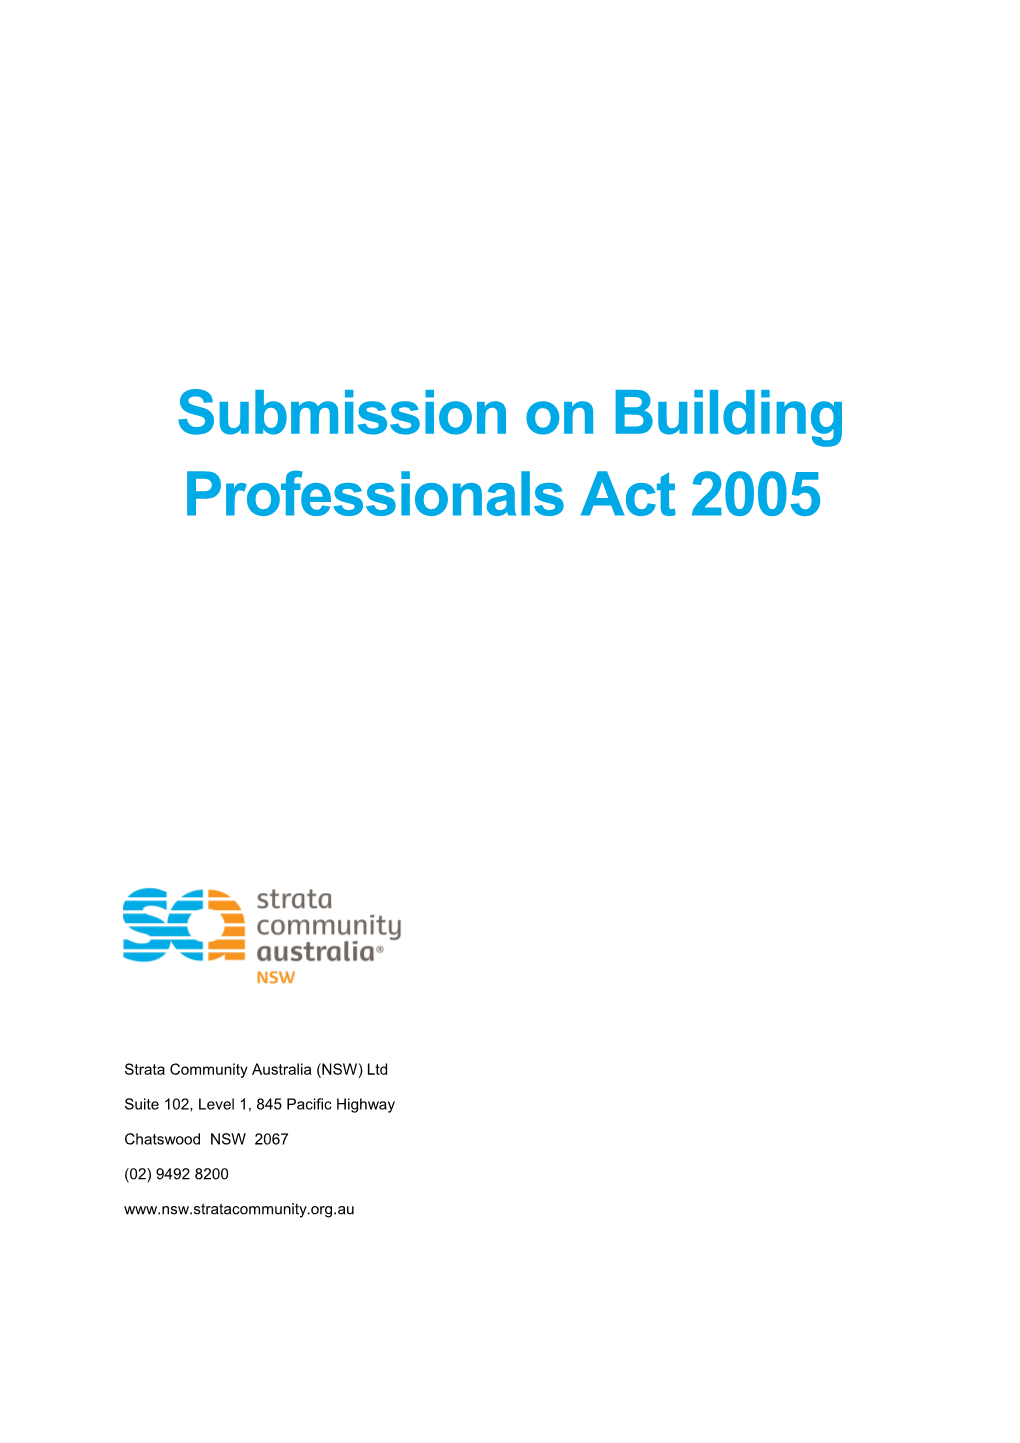 Submission on Building Professionals Act 2005